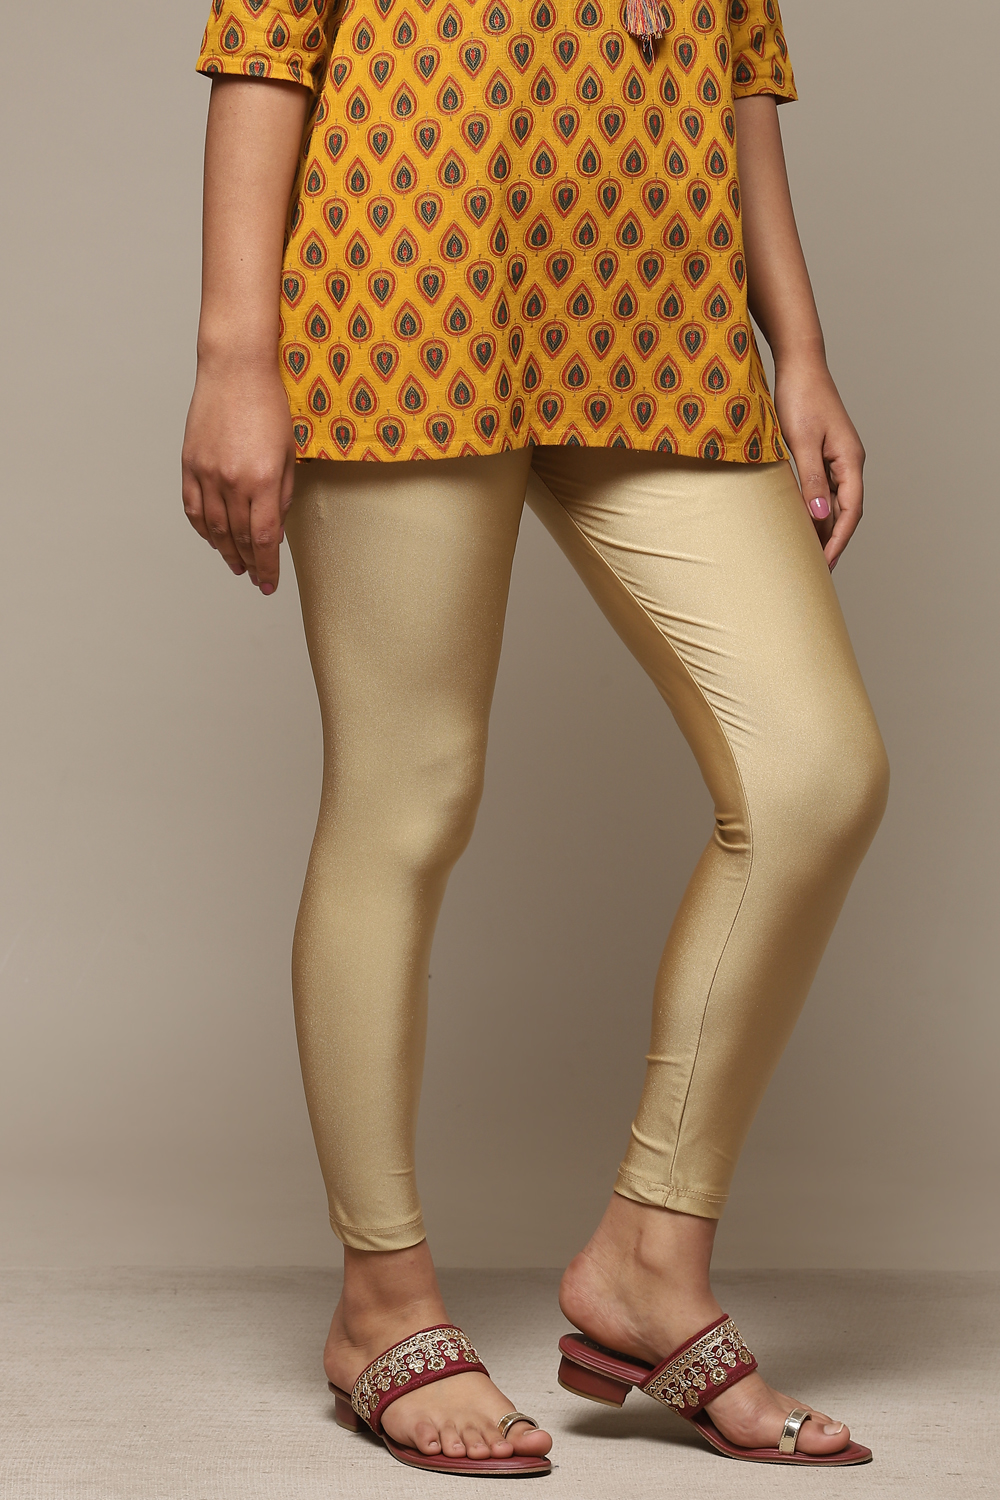 Buy gold colour leggings for women ankle length in India @ Limeroad-cokhiquangminh.vn